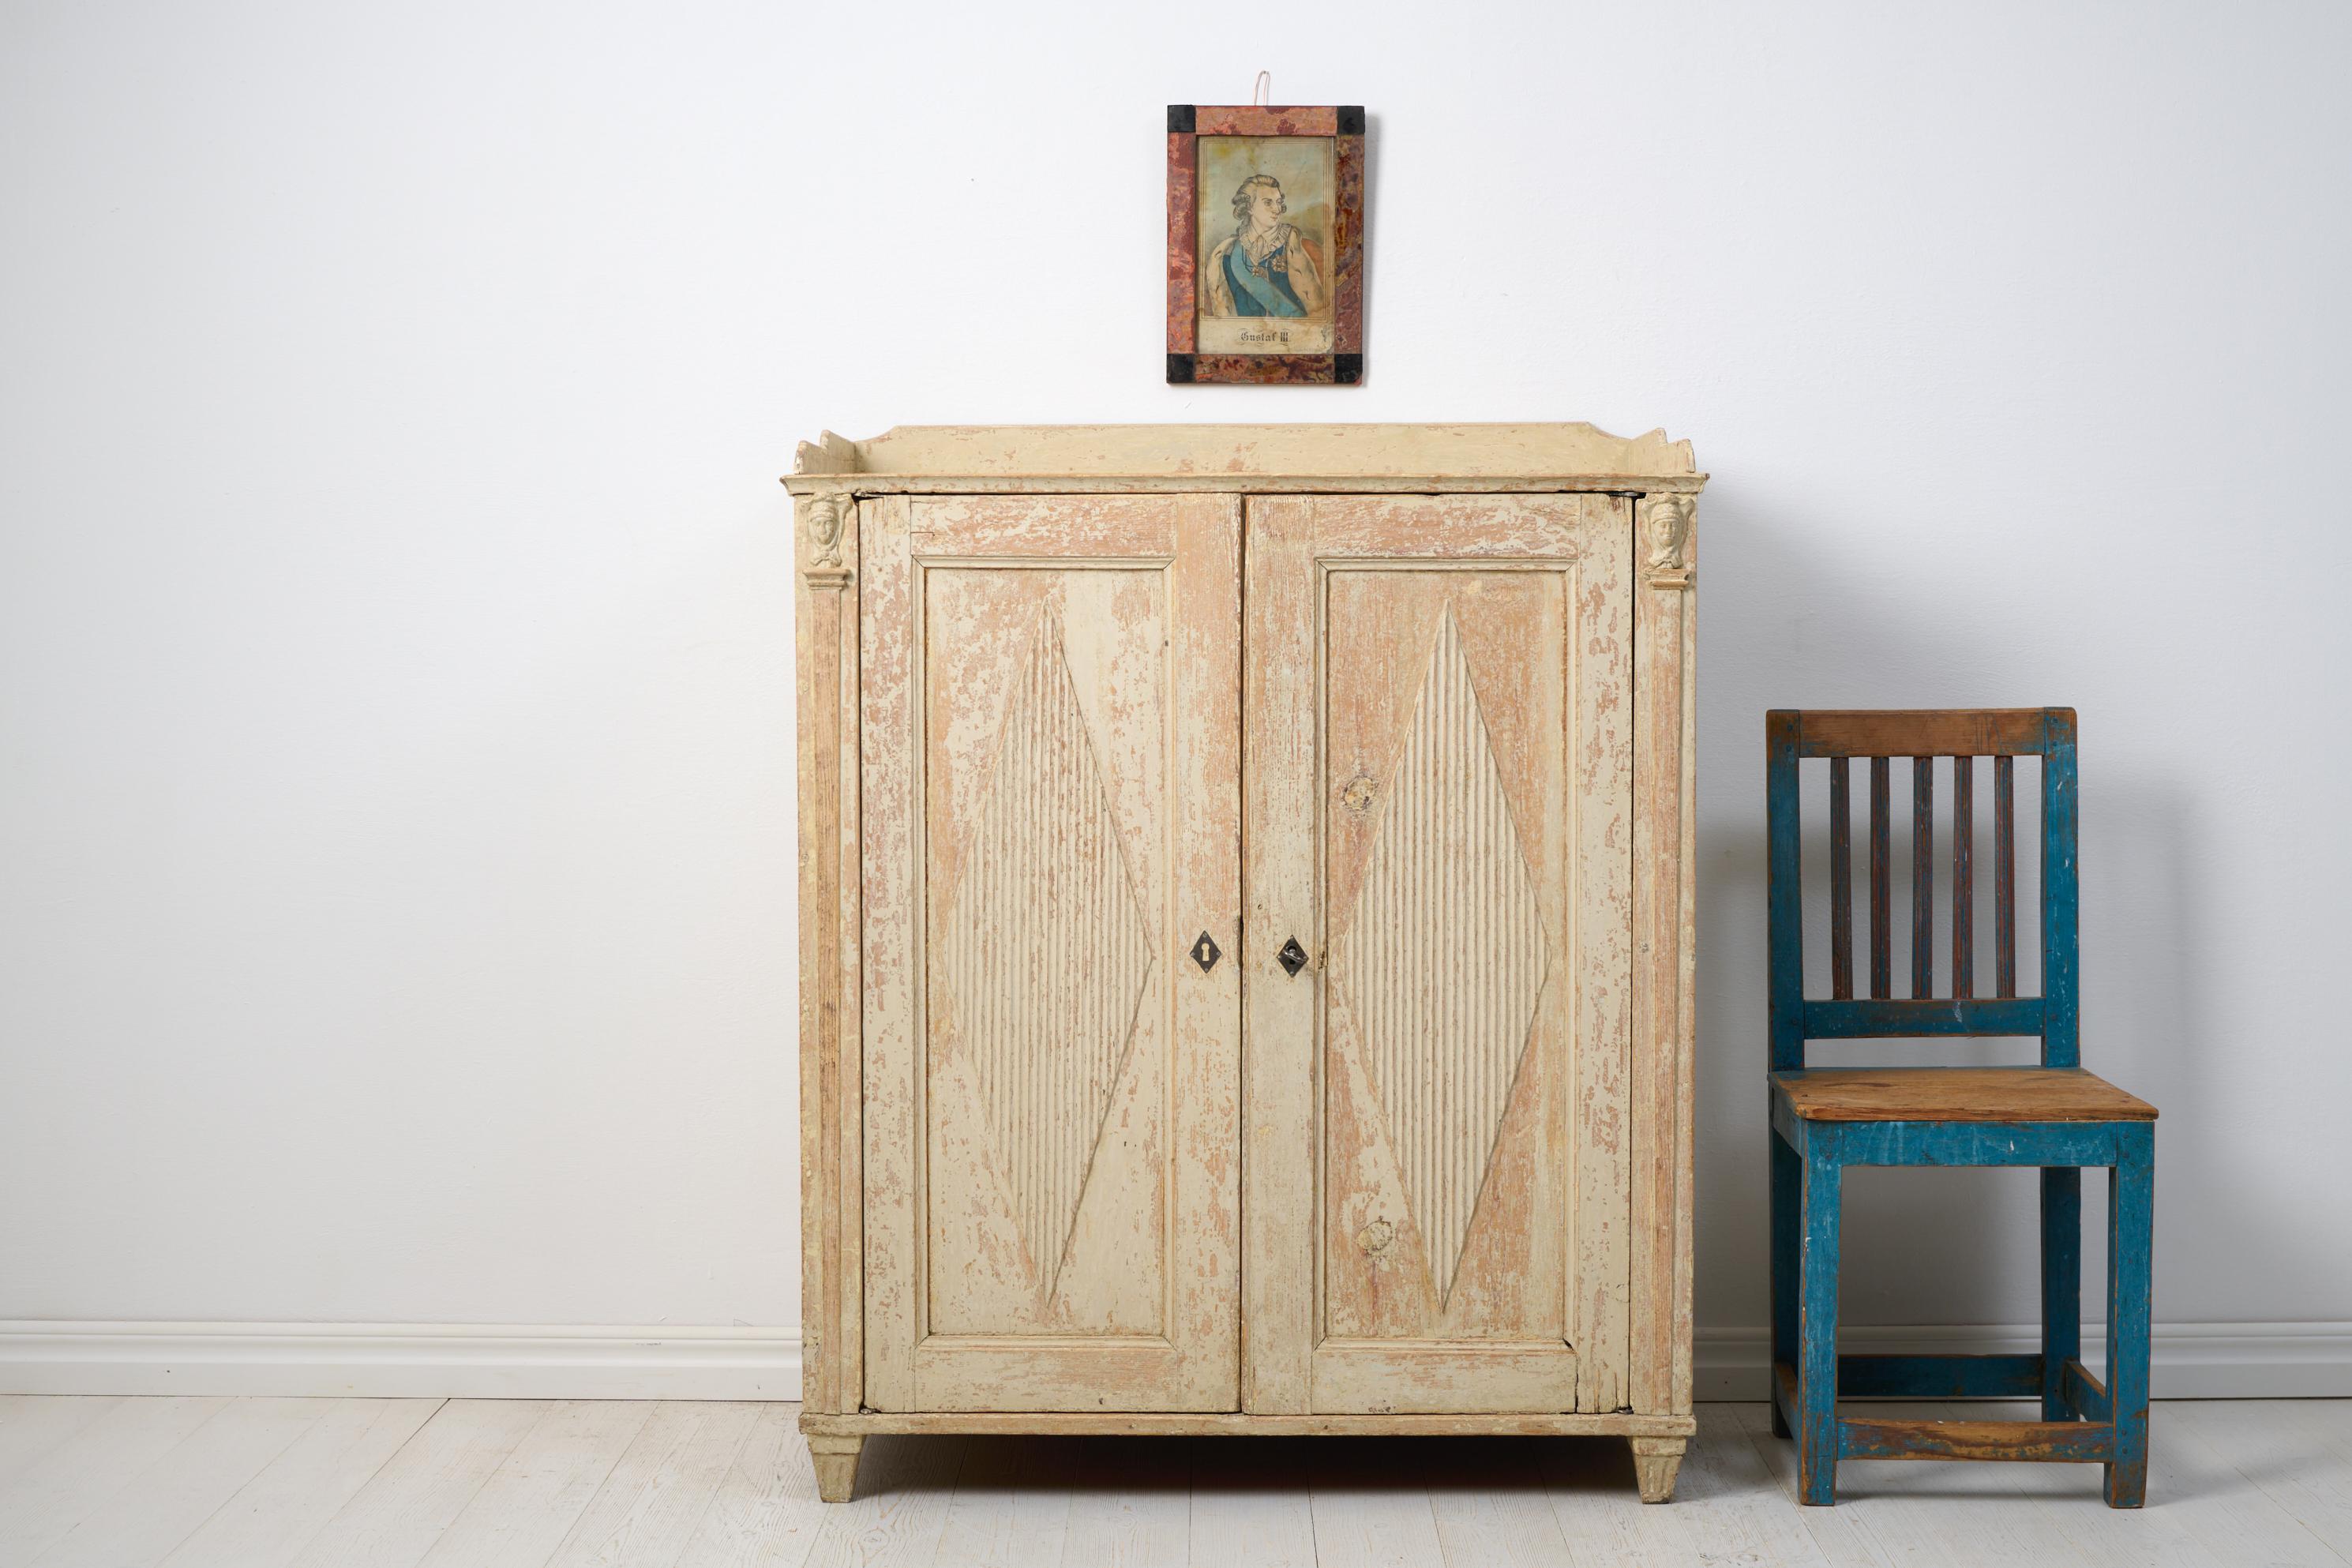 Antique Genuine Swedish Gustavian Neoclassical Handmade Pine Sideboard In Good Condition For Sale In Kramfors, SE